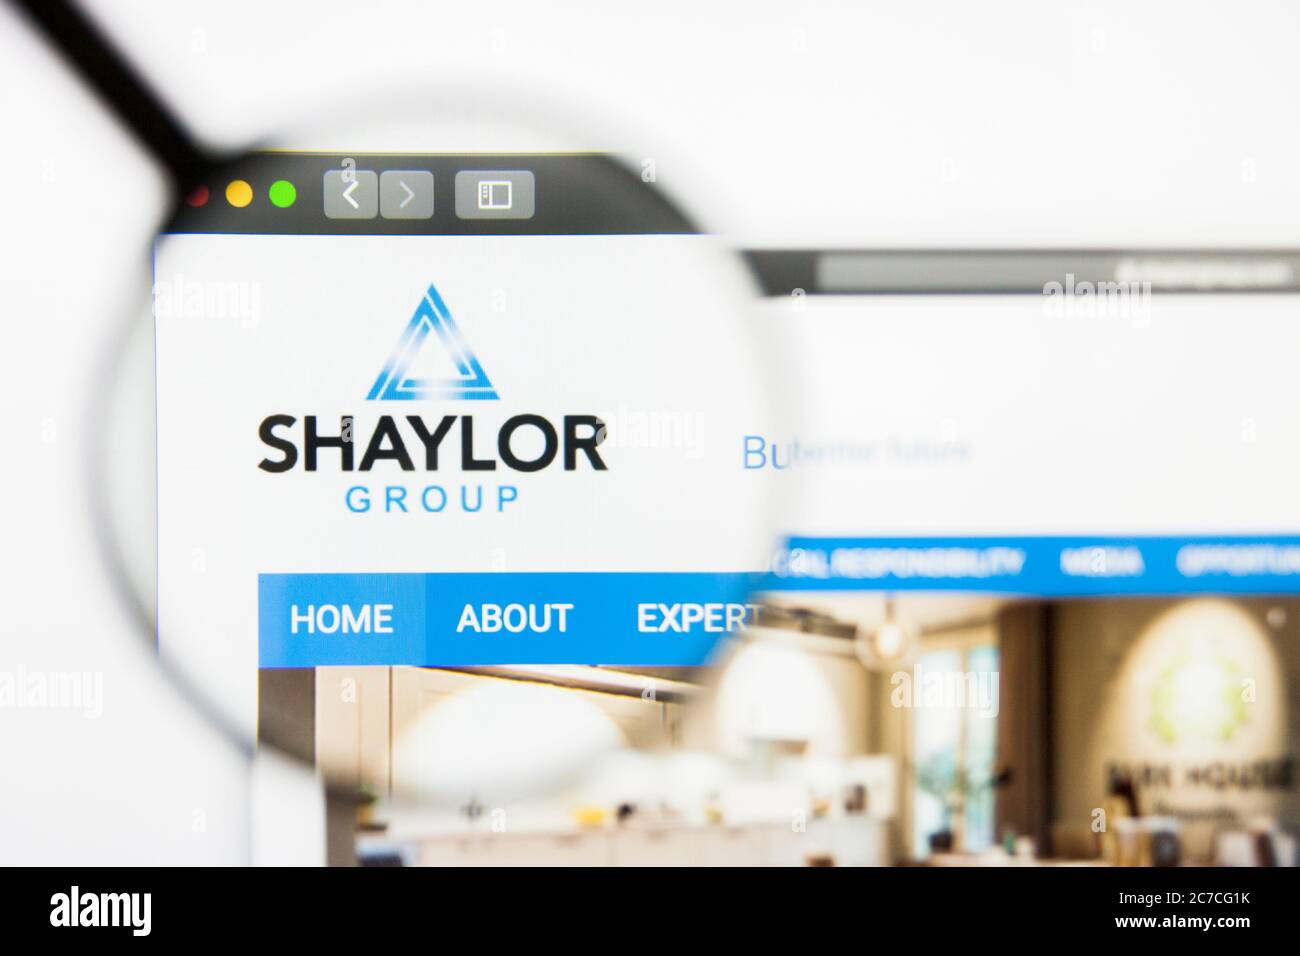 San Francisco, California, USA - 29 March 2019: Illustrative Editorial of Shaylor Group website homepage. Shaylor Group logo visible on display screen Stock Photo